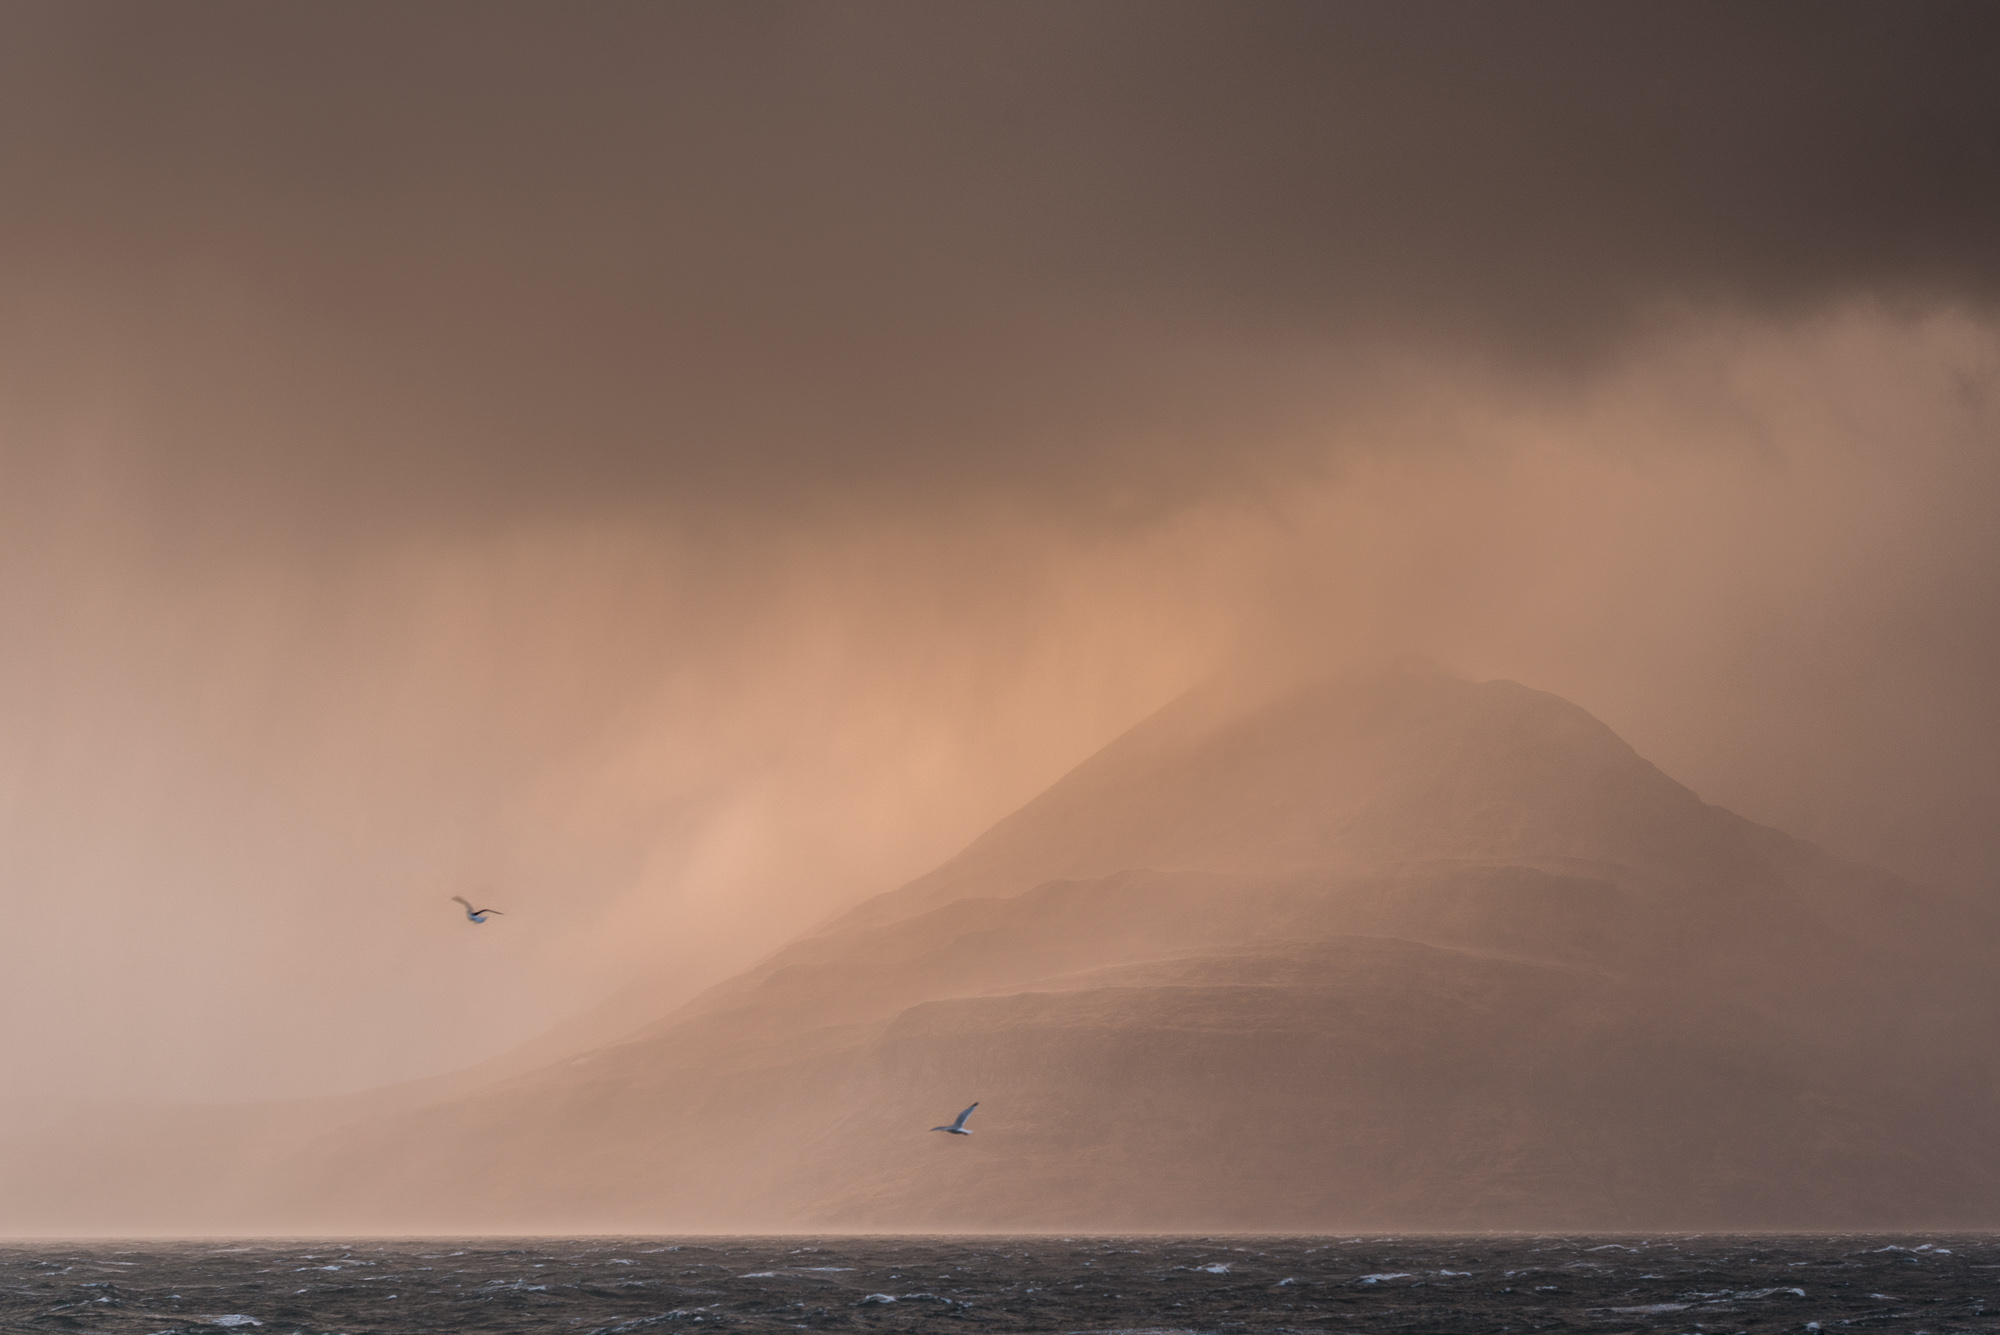 Elgol mountain squall with two gulls